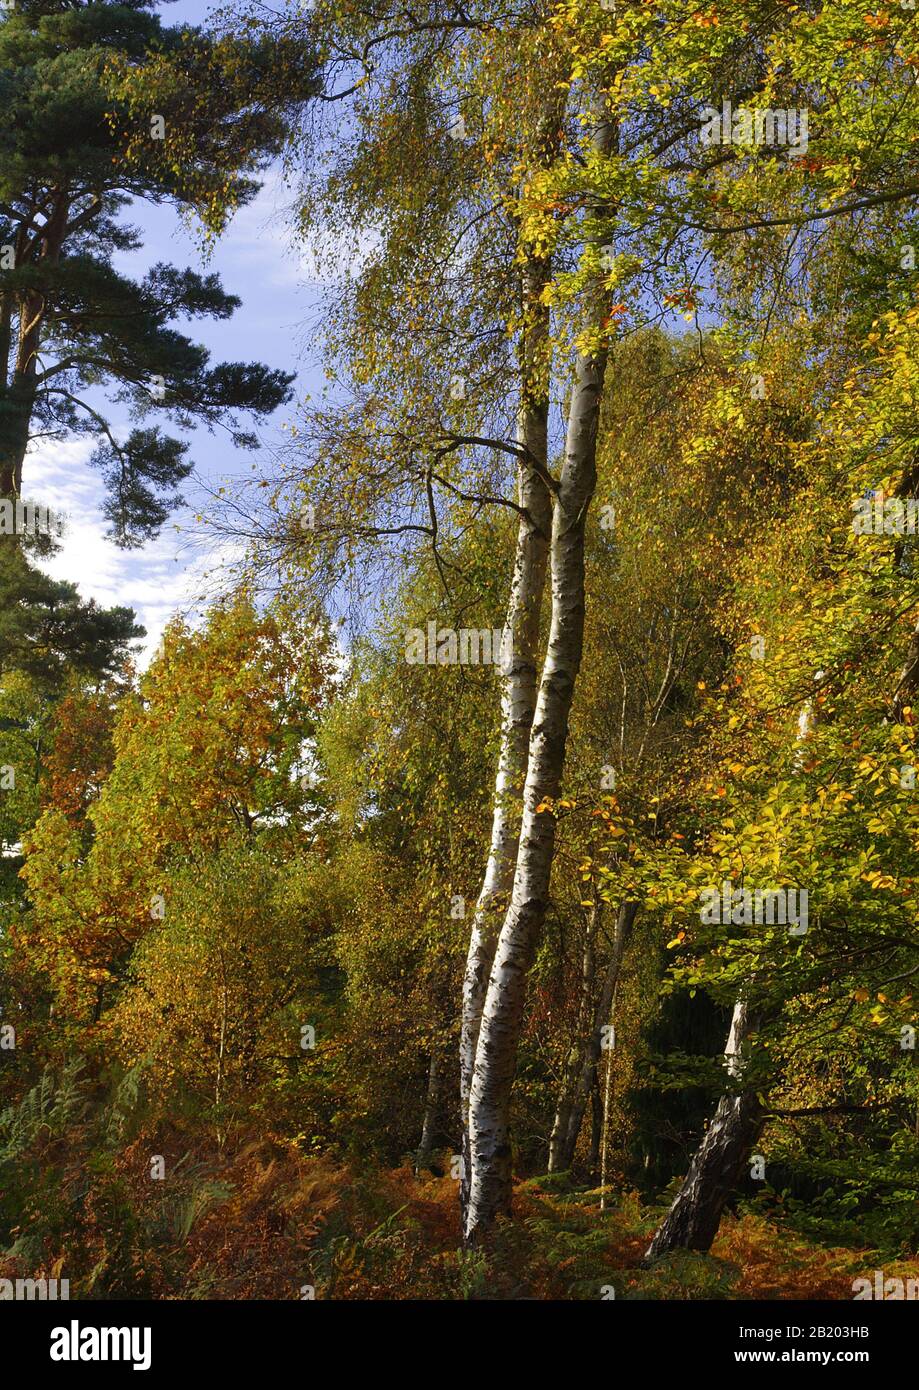 Silver birch and scots pine trees in early autumn Stock Photo